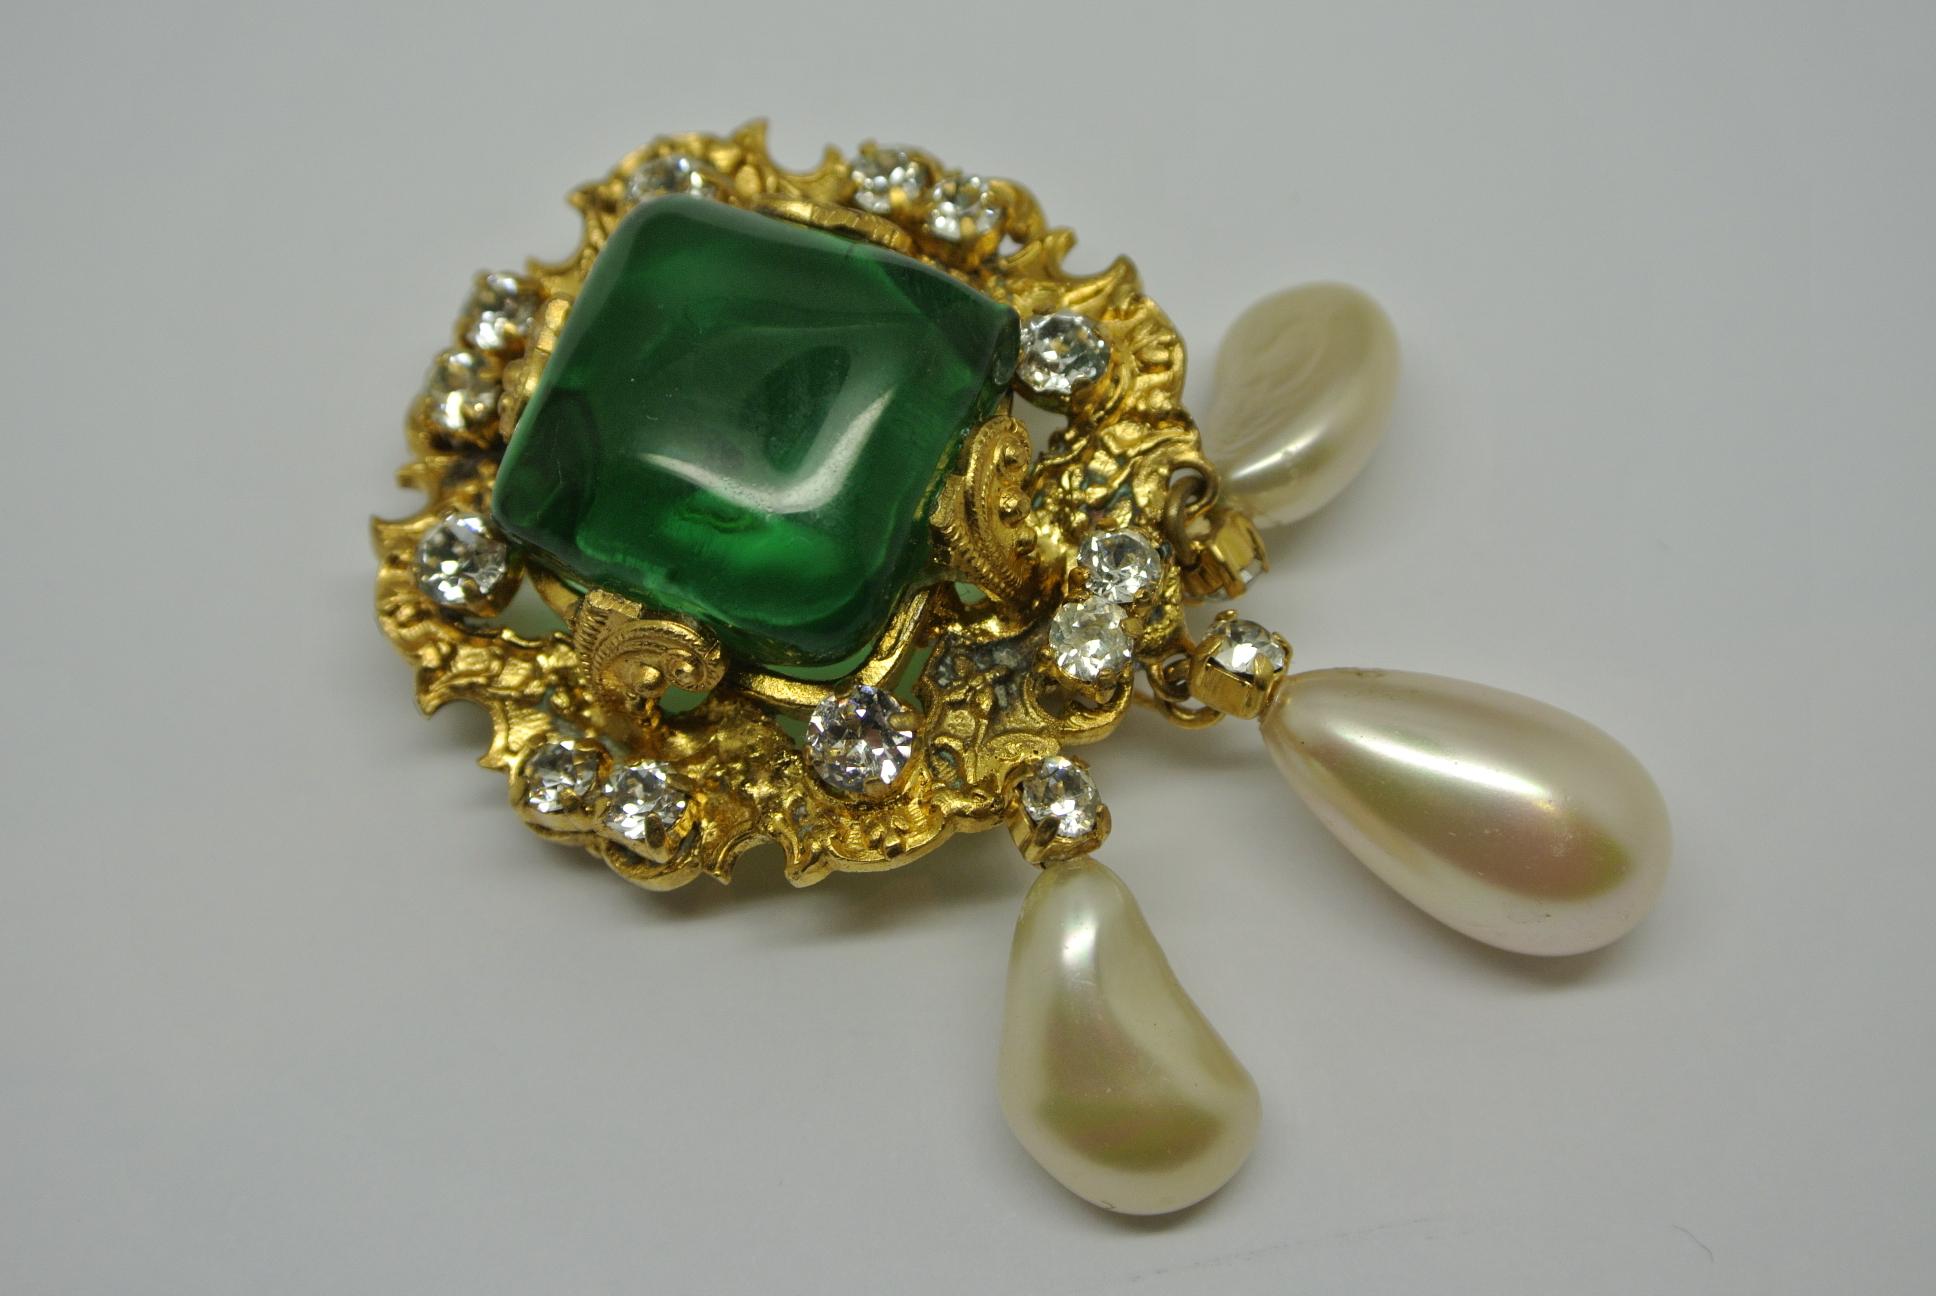 chanel brooch with pearl drop